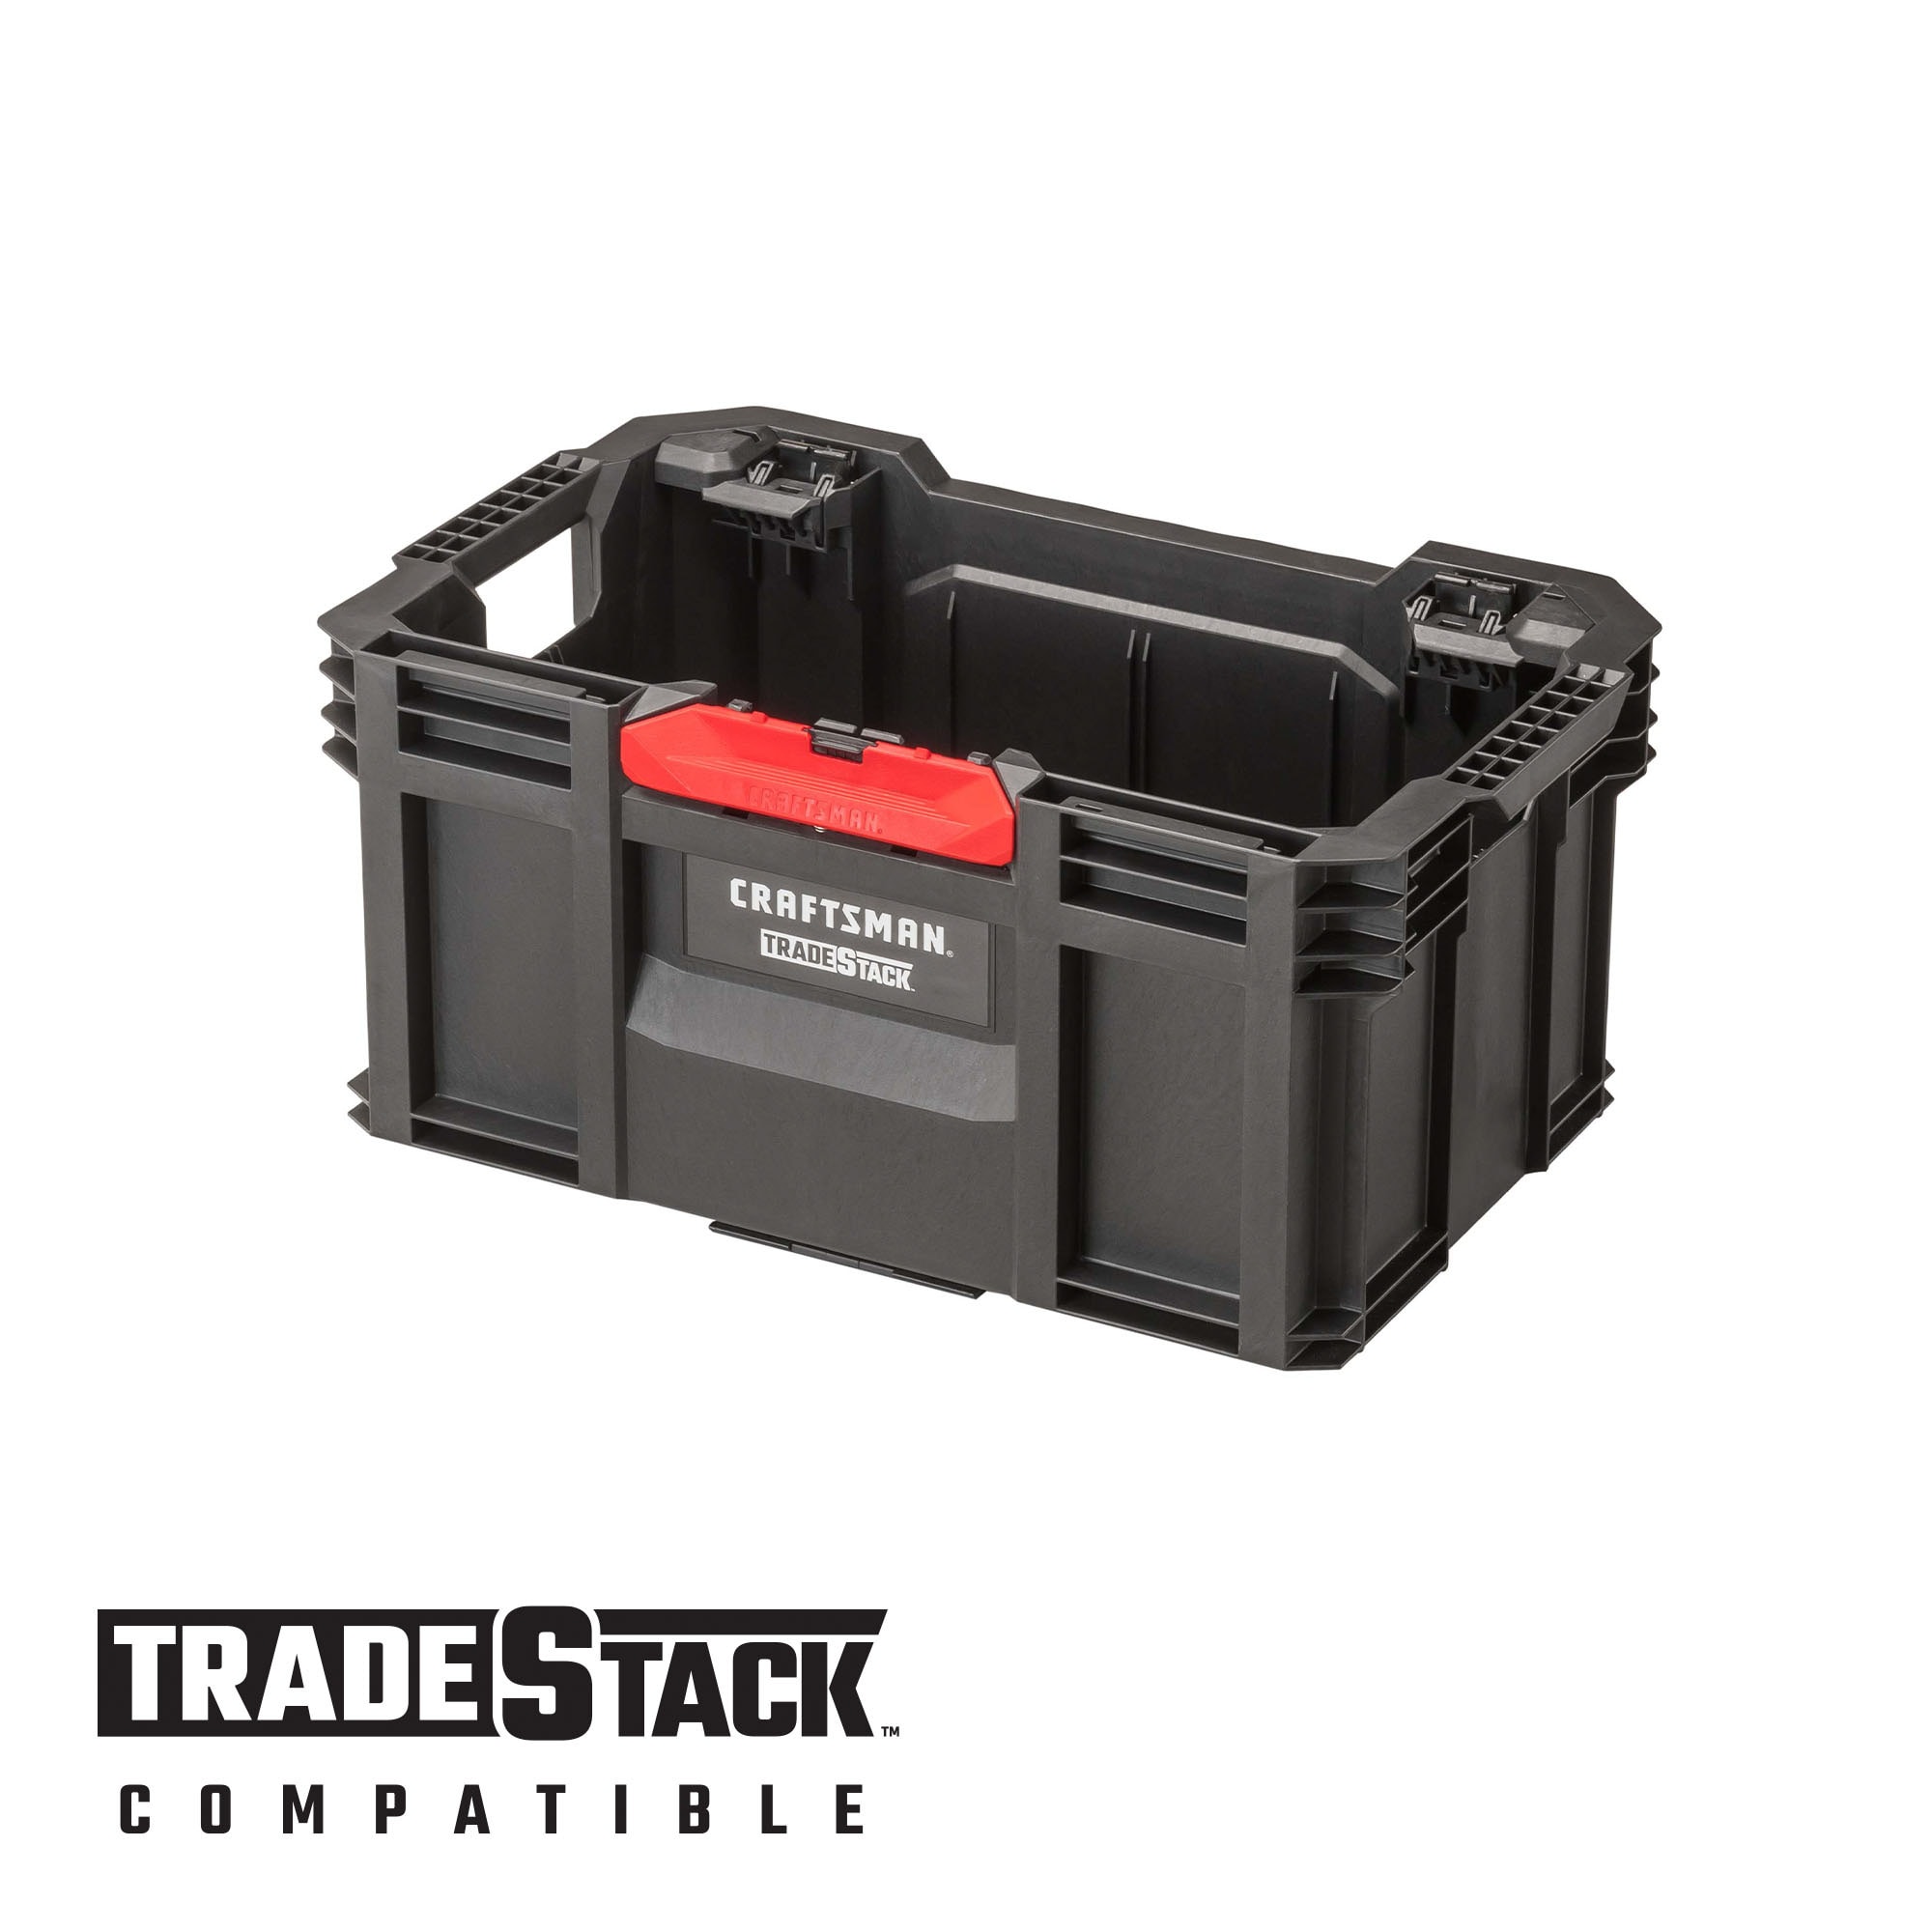 CRAFTSMAN Pro 20-in Multiple Colors/Finishes Metal Lockable Tool